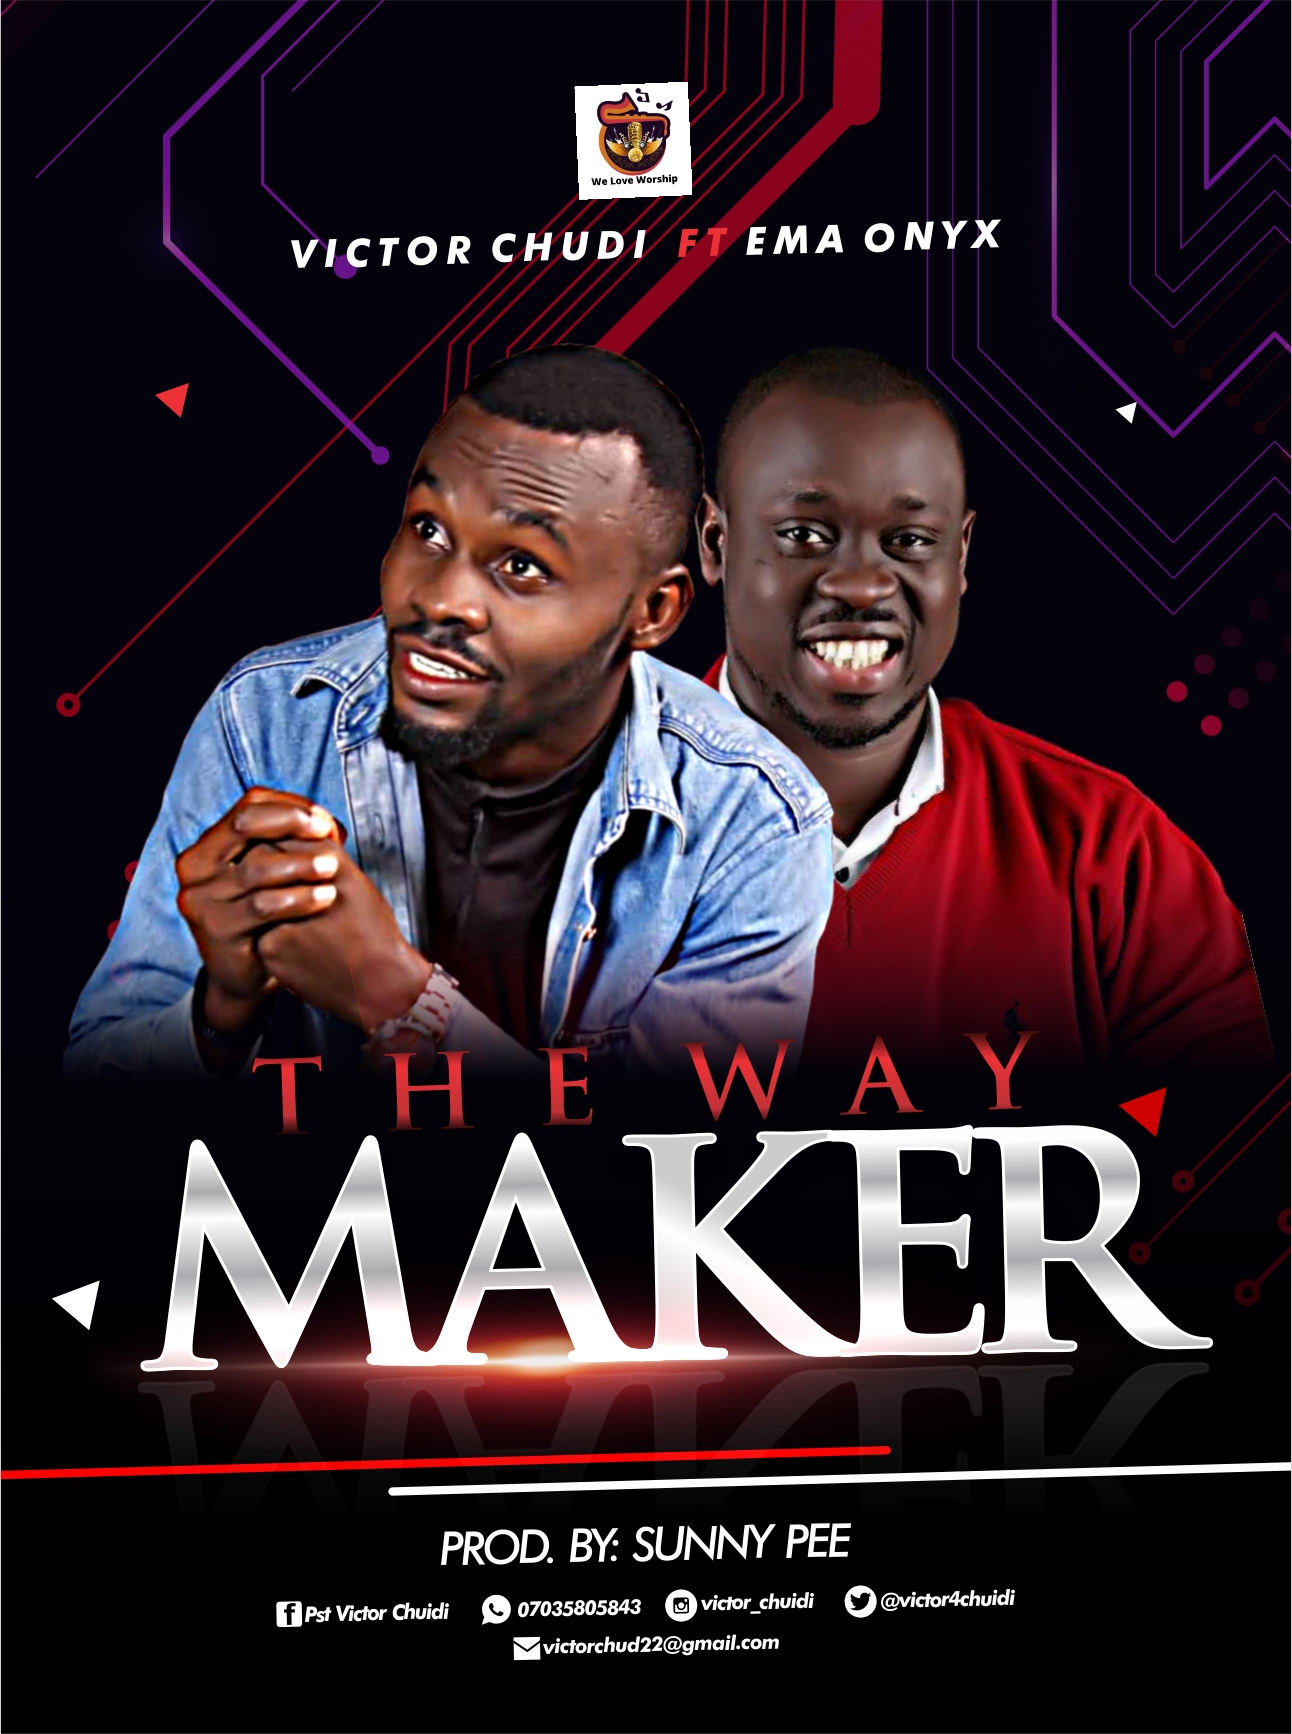 Download THE WAY MAKER by Victor Chudi (MP3 SONG) 17